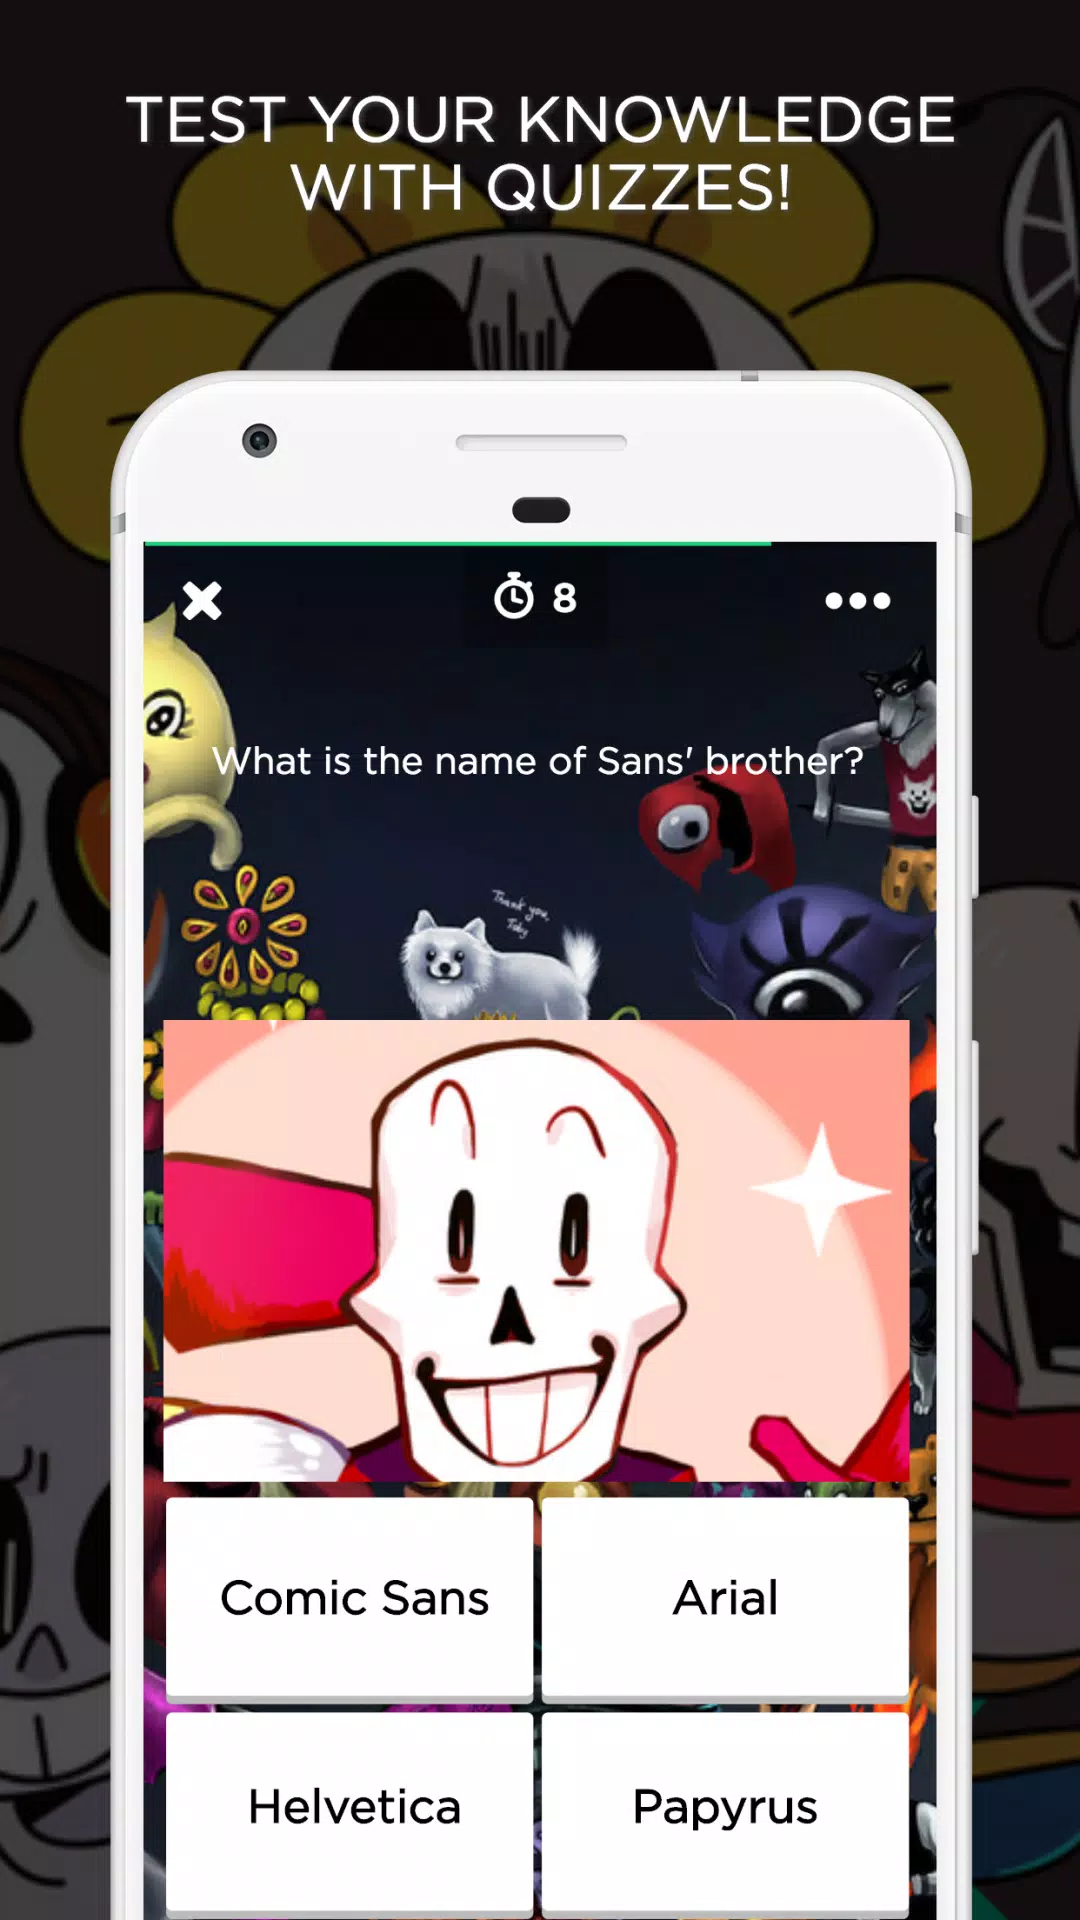 Undertale APK (Android App) - Free Download